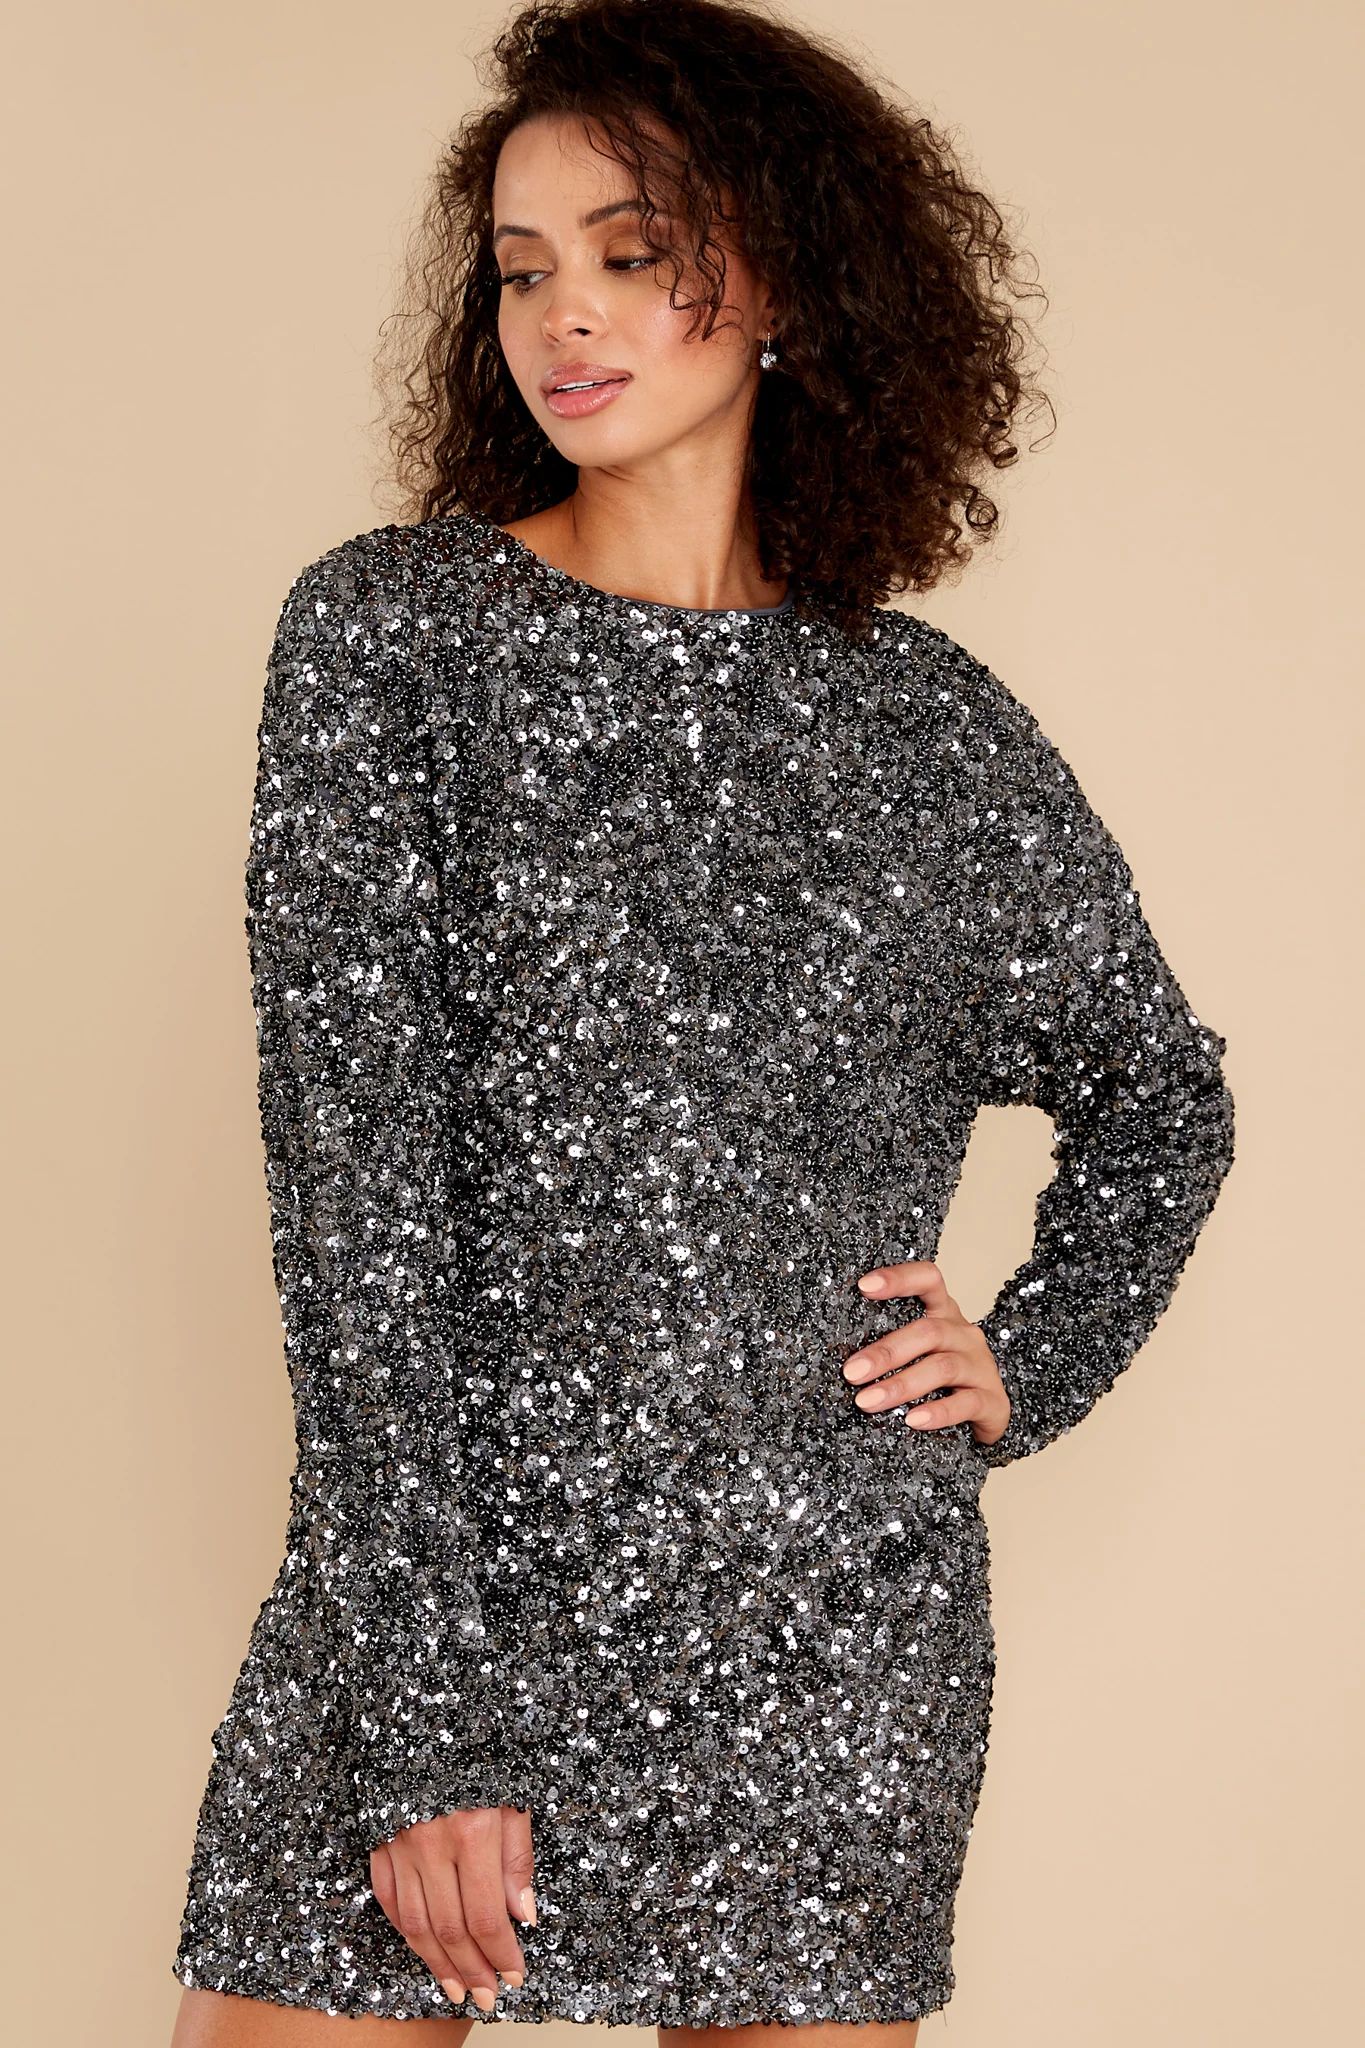 Glamour Girl Silver Sequin Dress | Red Dress 